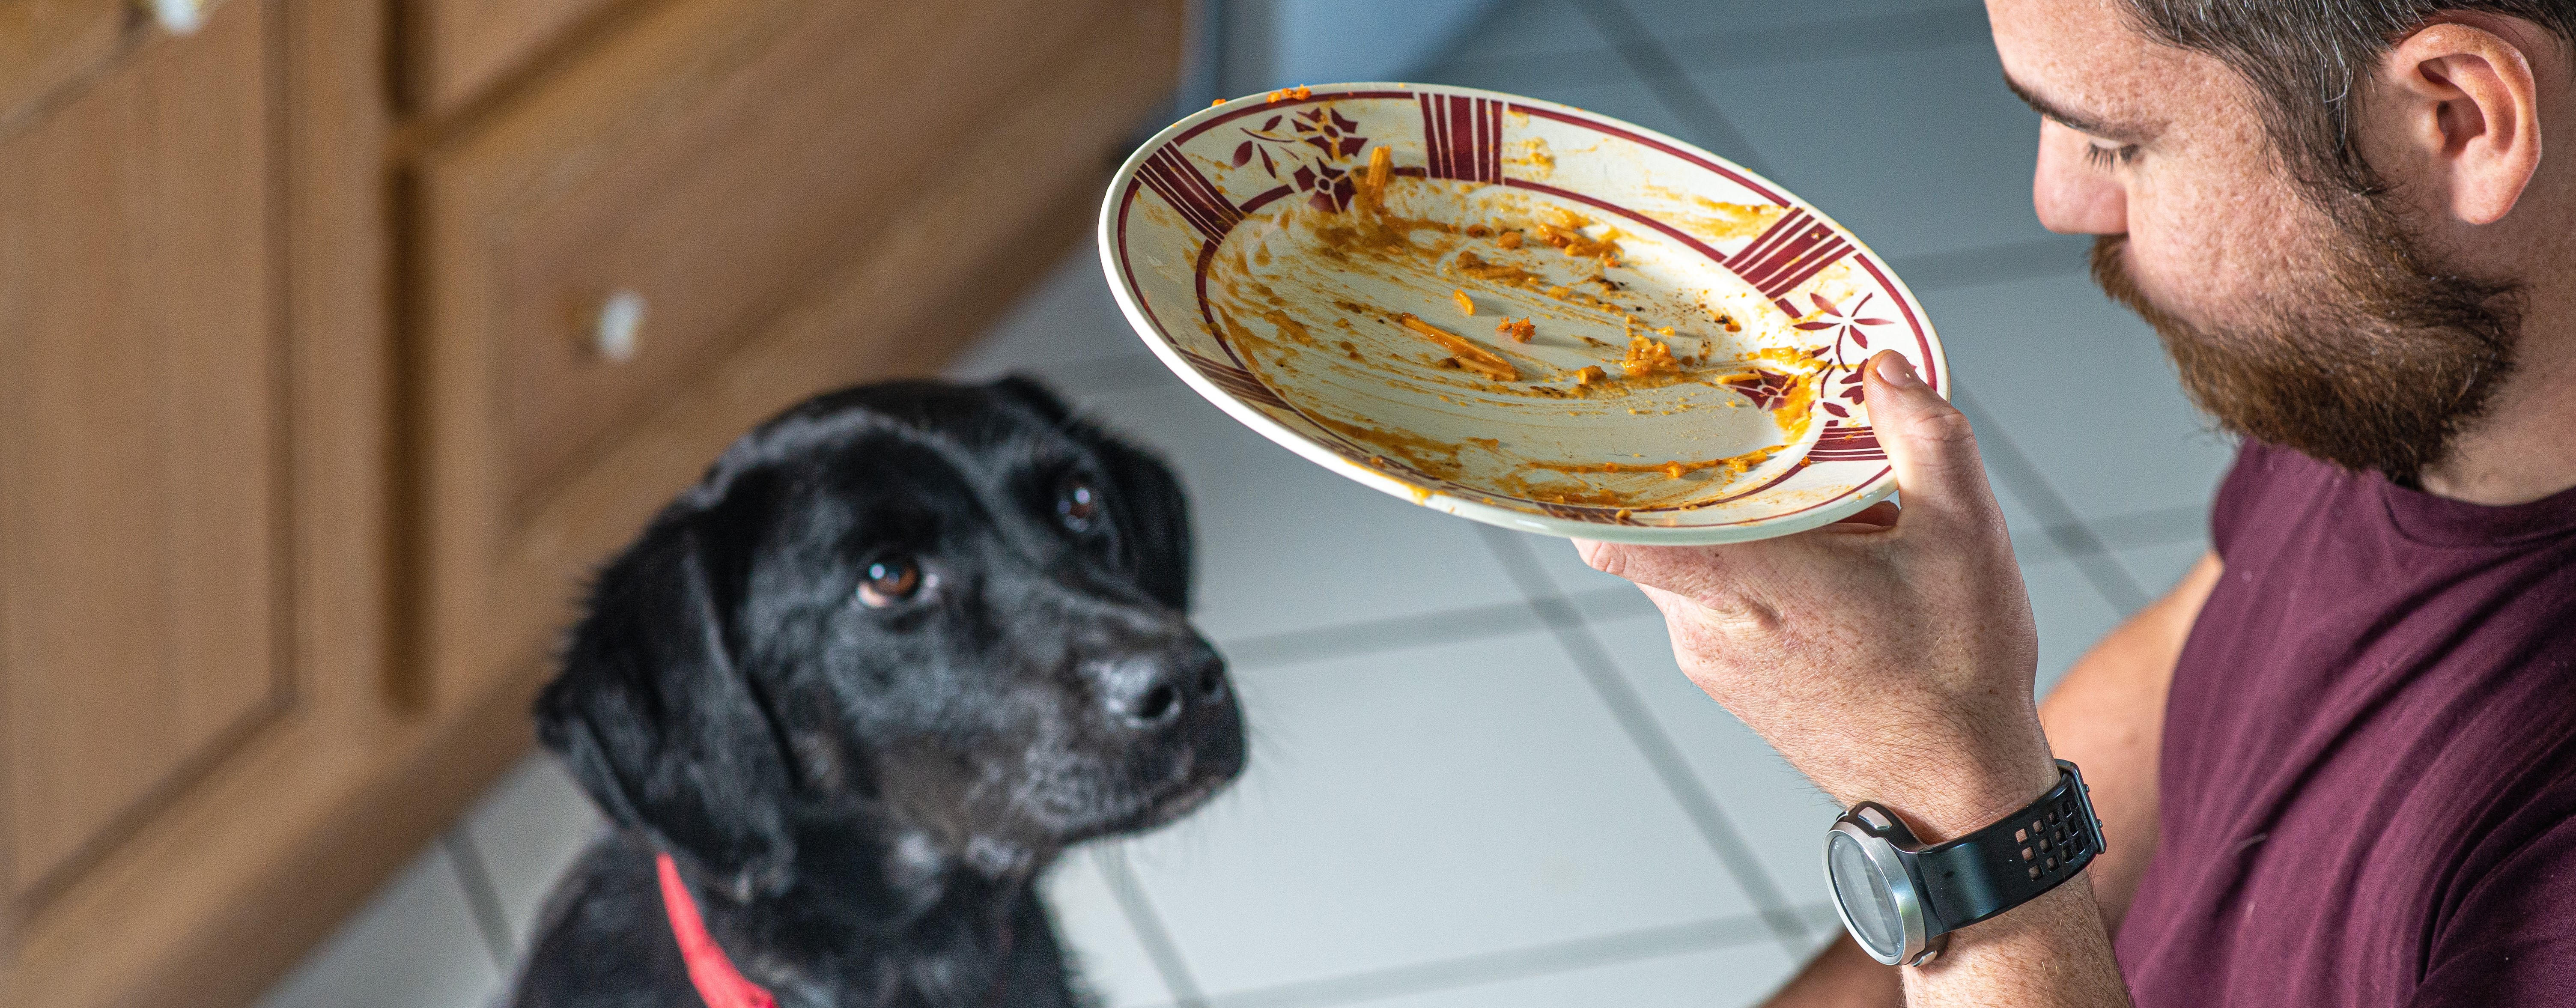 banner image of dog begging for food at table with man holding plate of scraps